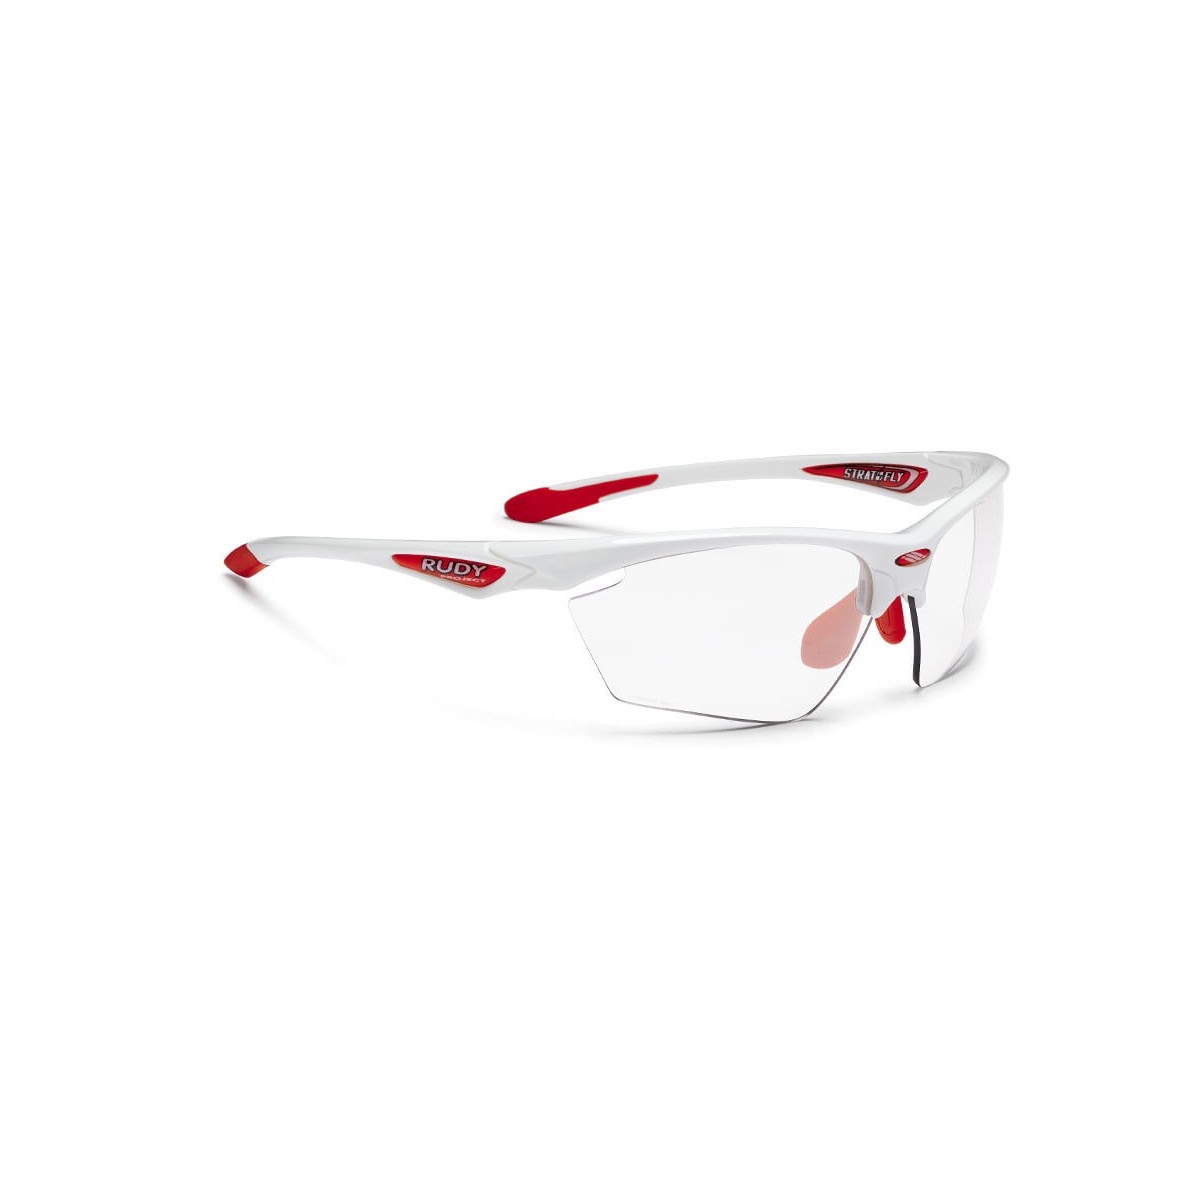 SEL.White günstig Kaufen-Brille Stratofly White Gloss RPO Photoclear Rudy Project. Brille Stratofly White Gloss RPO Photoclear Rudy Project . 